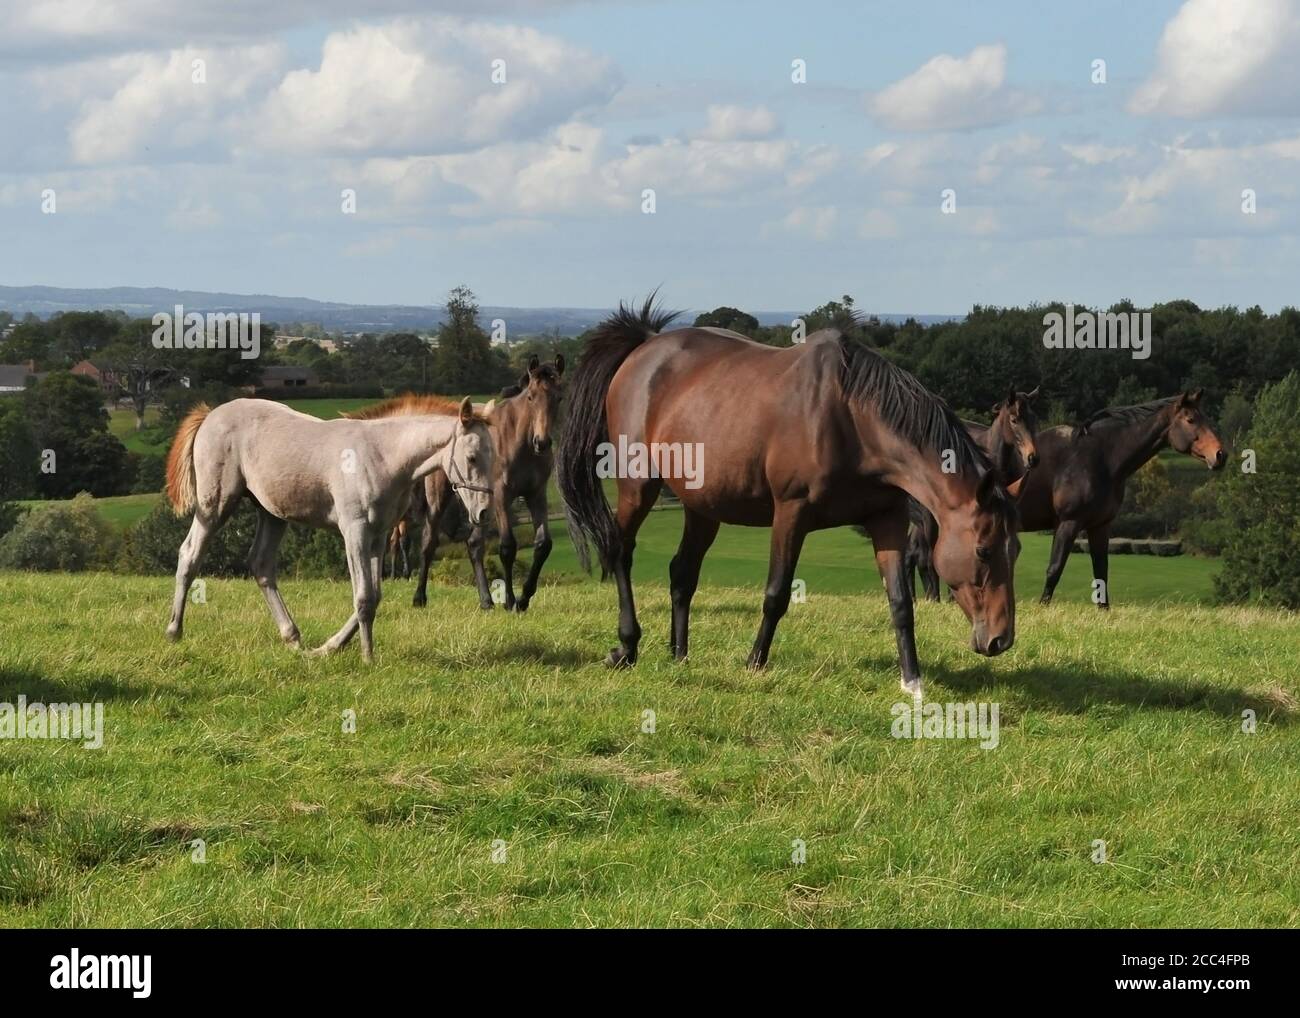 Mares and foals Equine Horses Stock Photo